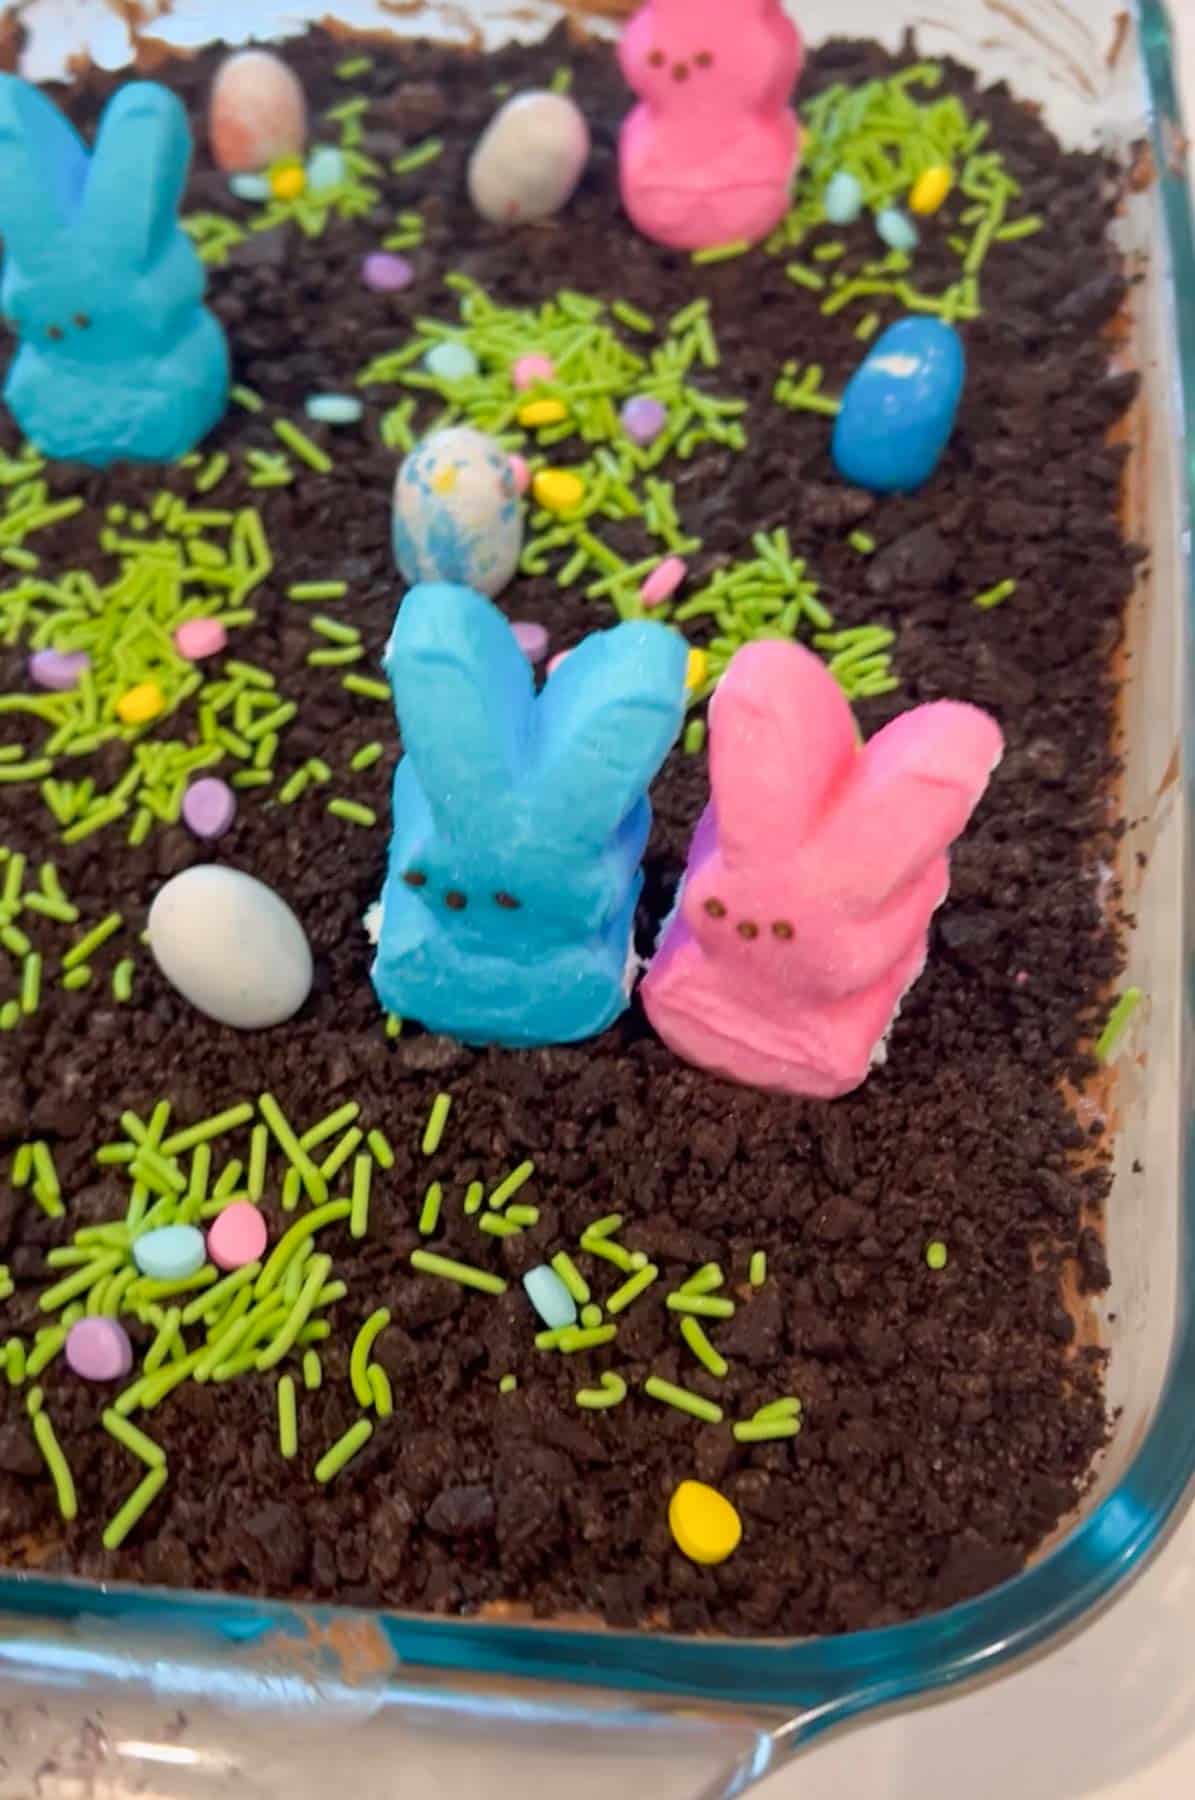 blue and pink bunny peeps on dirt cake